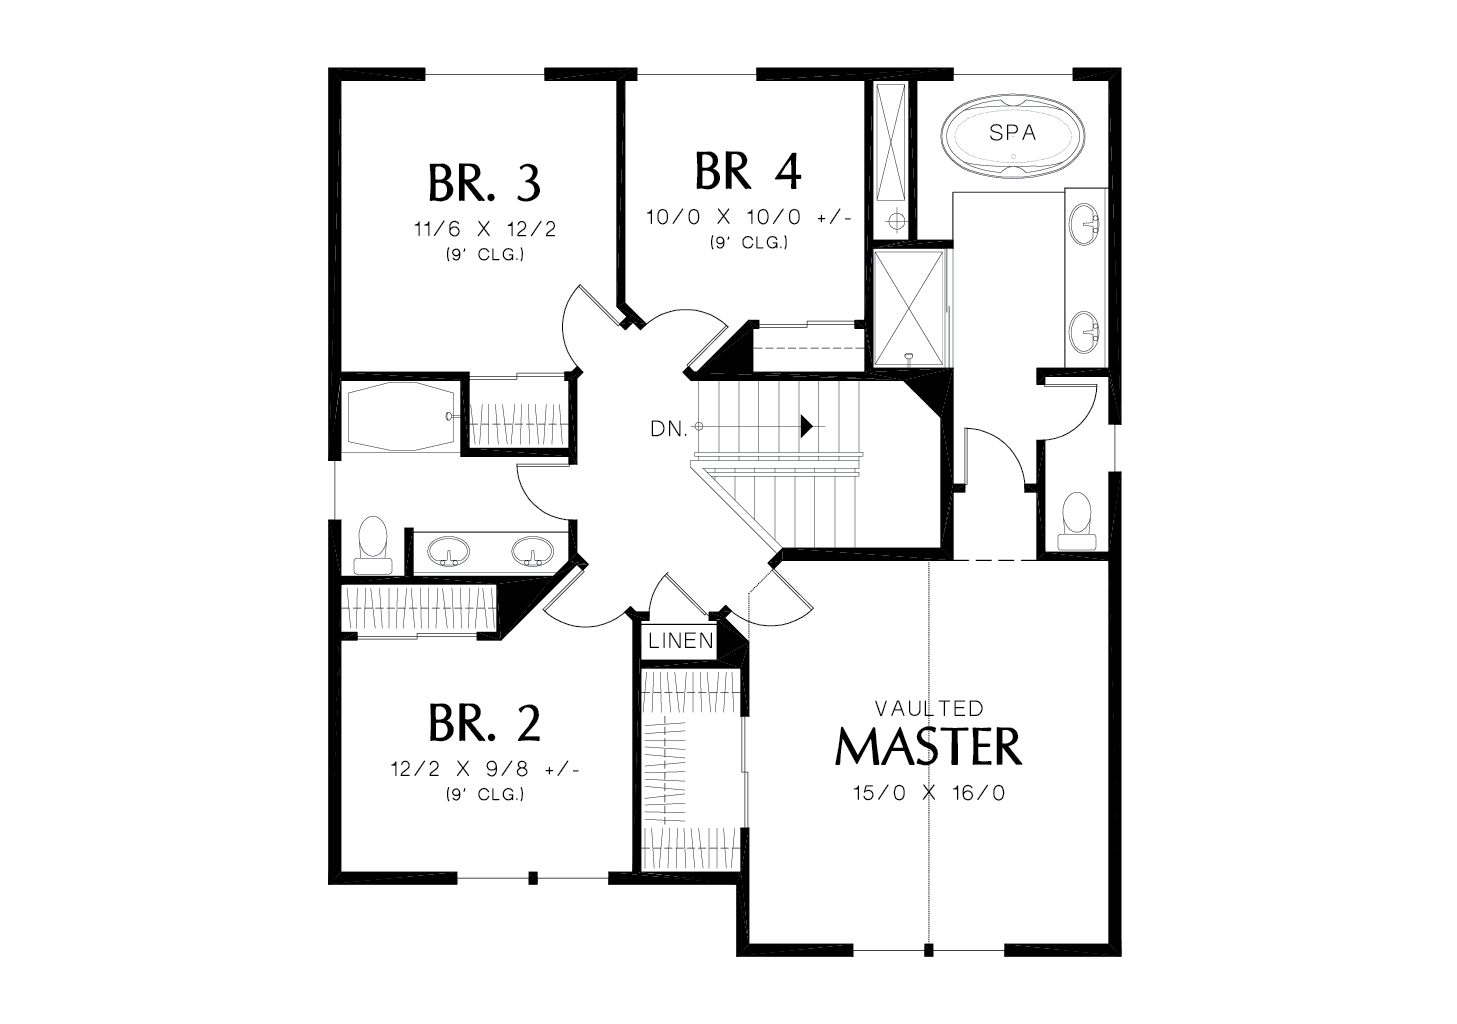 Fountainview 4193 - 4 Bedrooms and 2 Baths | The House Designers